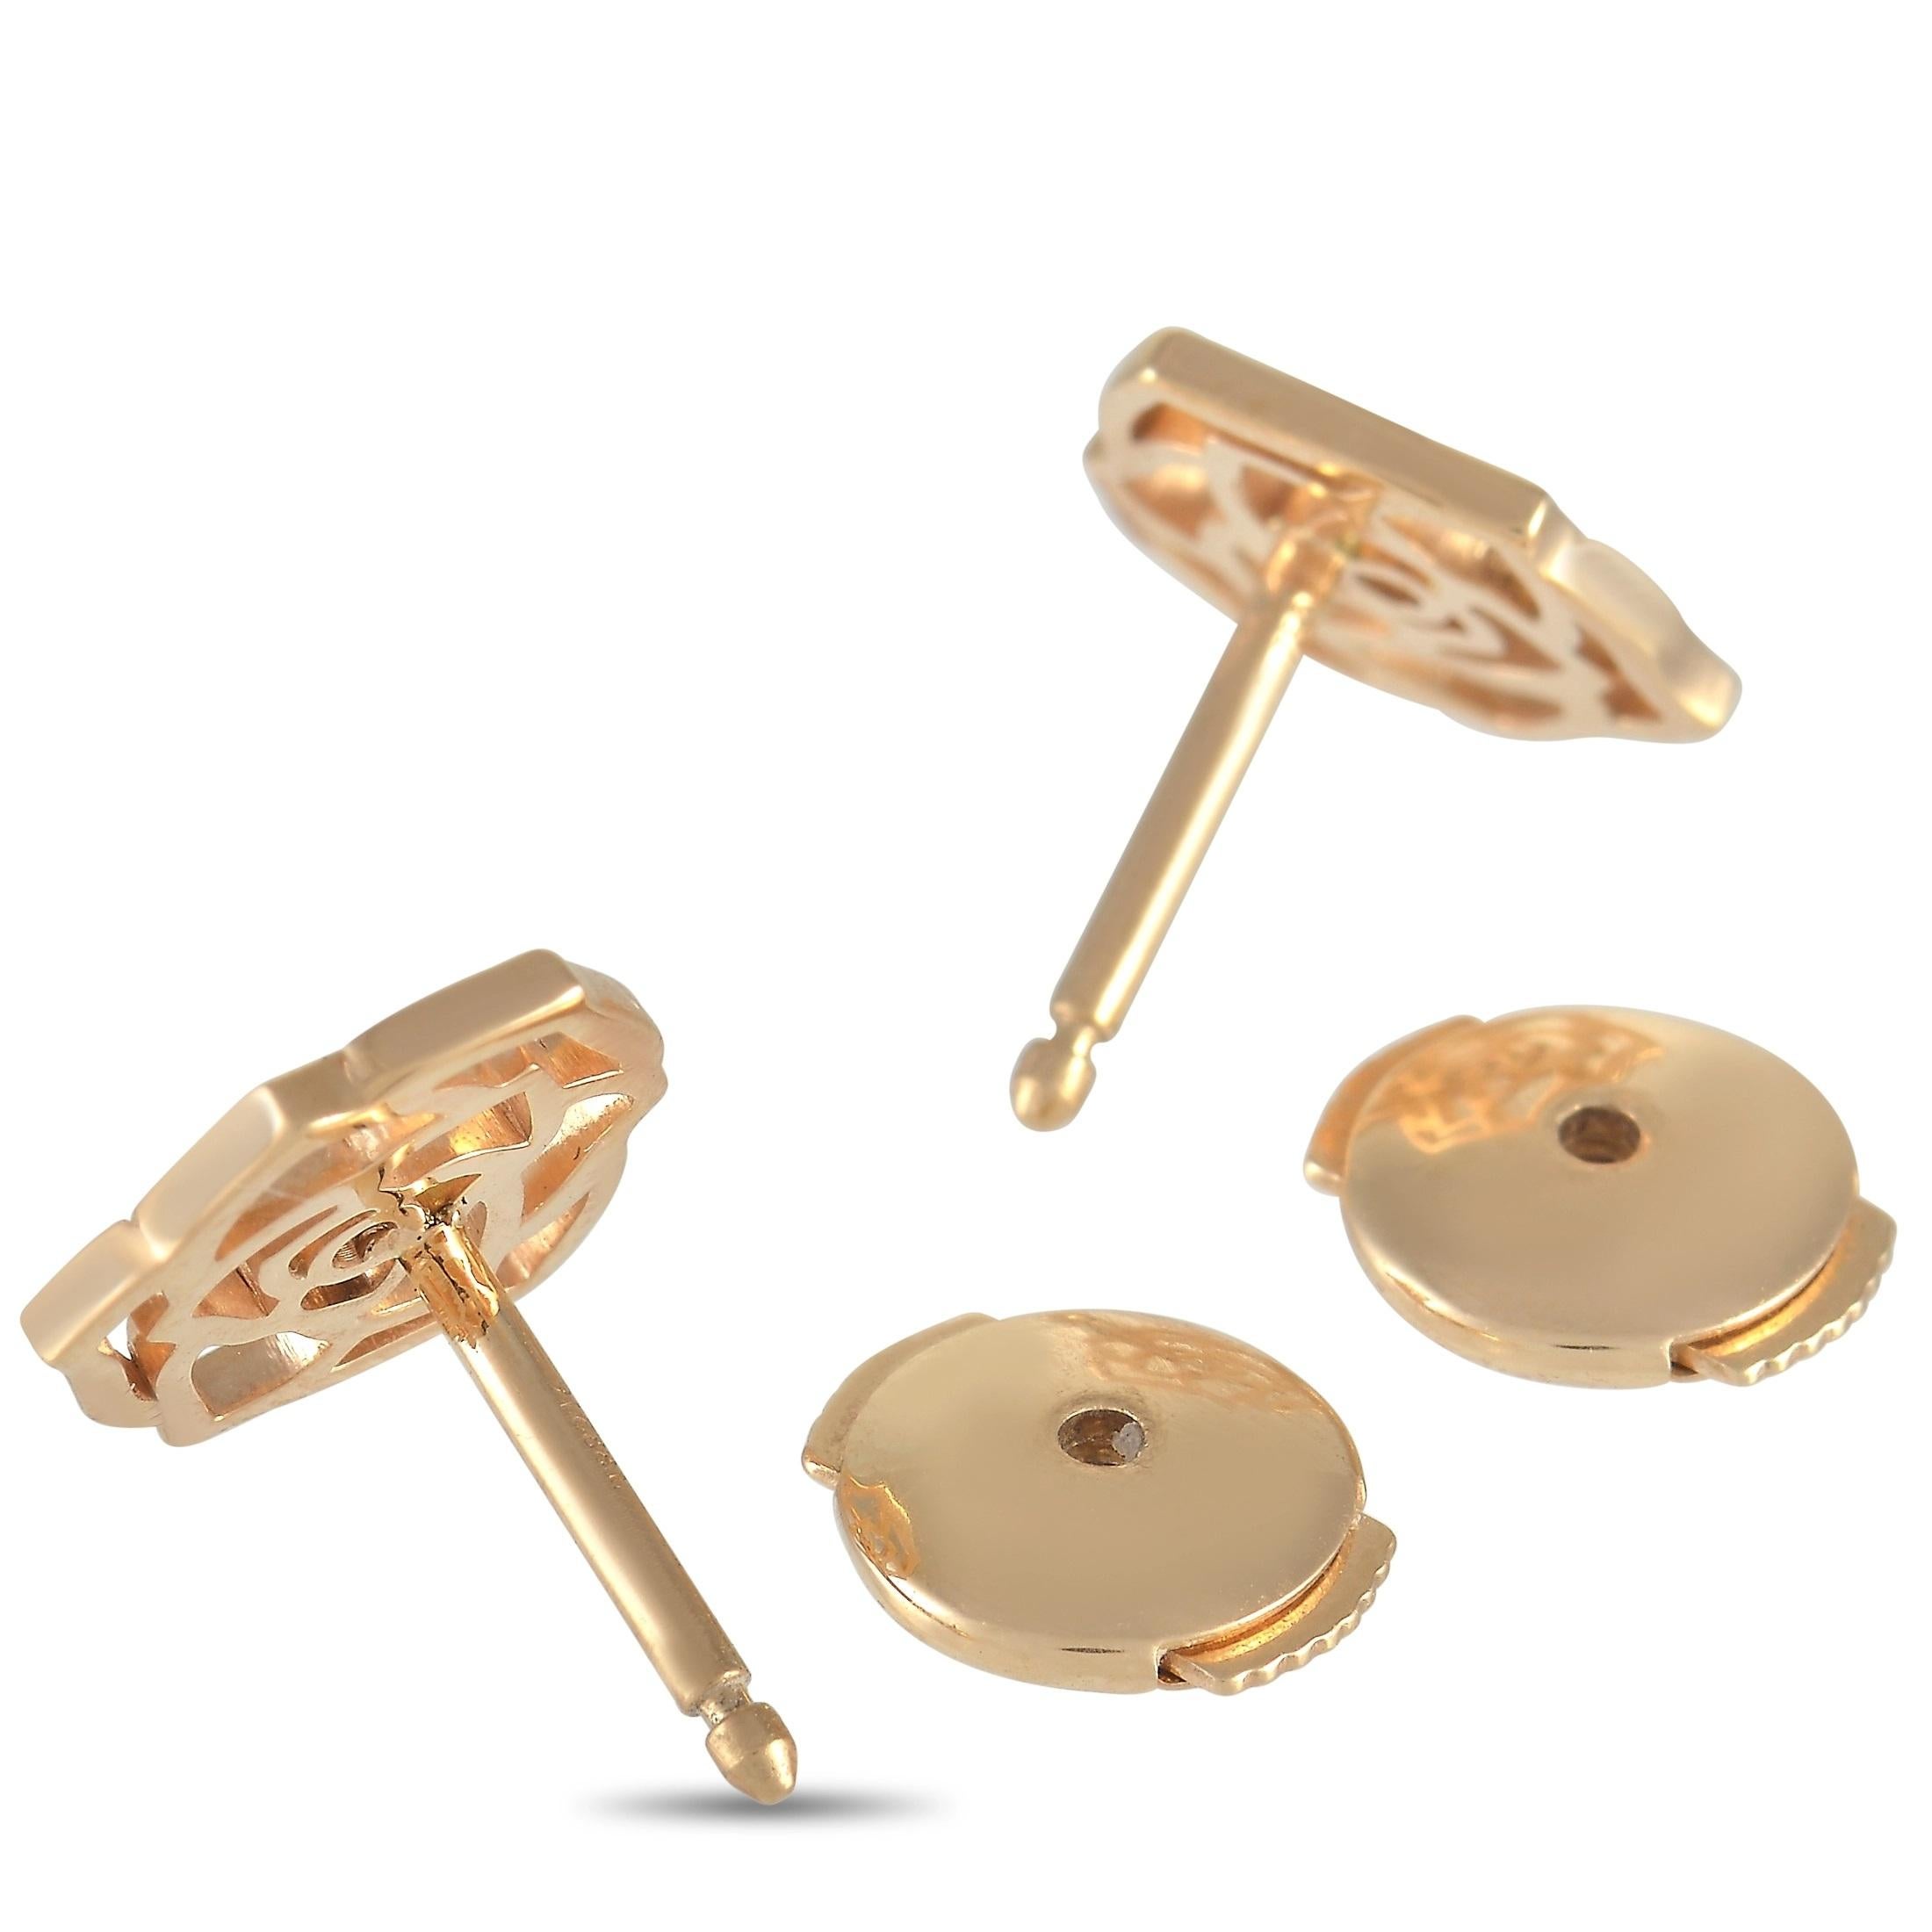  An artistic rose-shaped design makes these stud earrings from Piaget a statement piece that will never go out of style. Crafted from 18K Rose Gold, each one measures 0.44” round and features a single gemstone at the center. 
 
 This jewelry piece